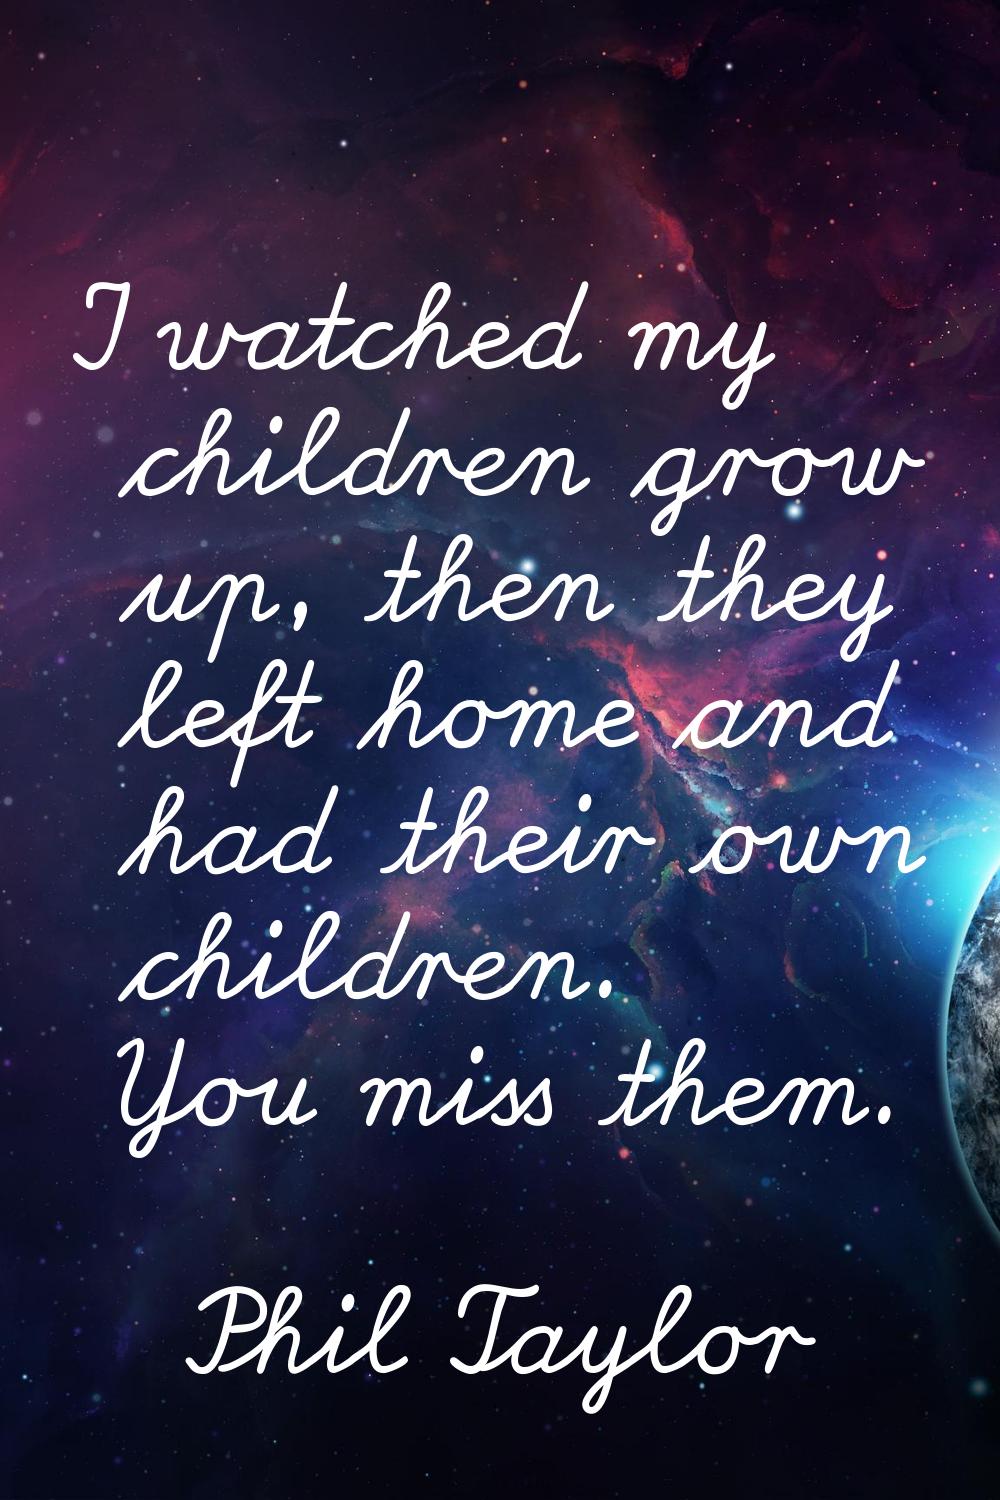 I watched my children grow up, then they left home and had their own children. You miss them.